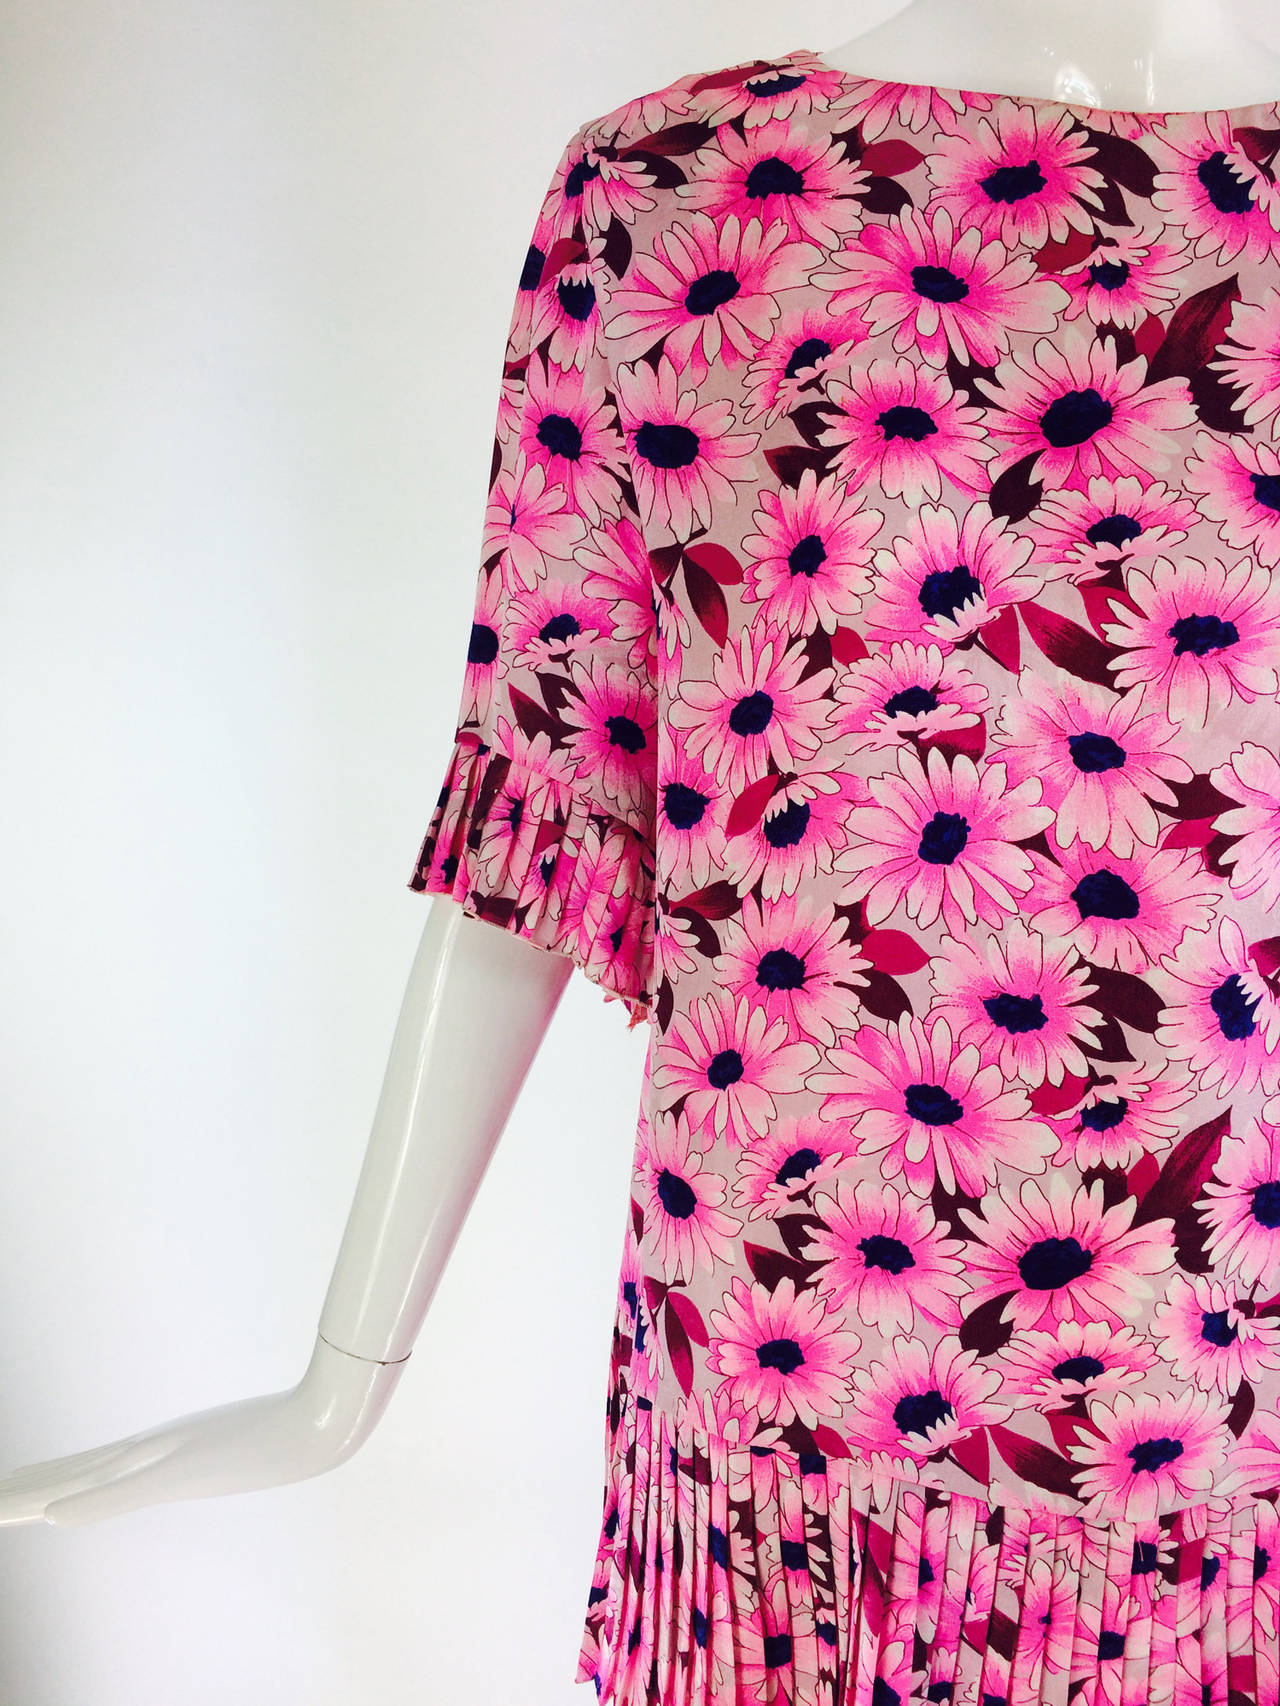 Daisy print tunic top in pink figured silk with blue eyed daises...Round neckline top has loose fitting elbow length sleeves that have pleated cuffs...The tunic is cut straight and has a pleated hem...Unlined...Closes at the back with a